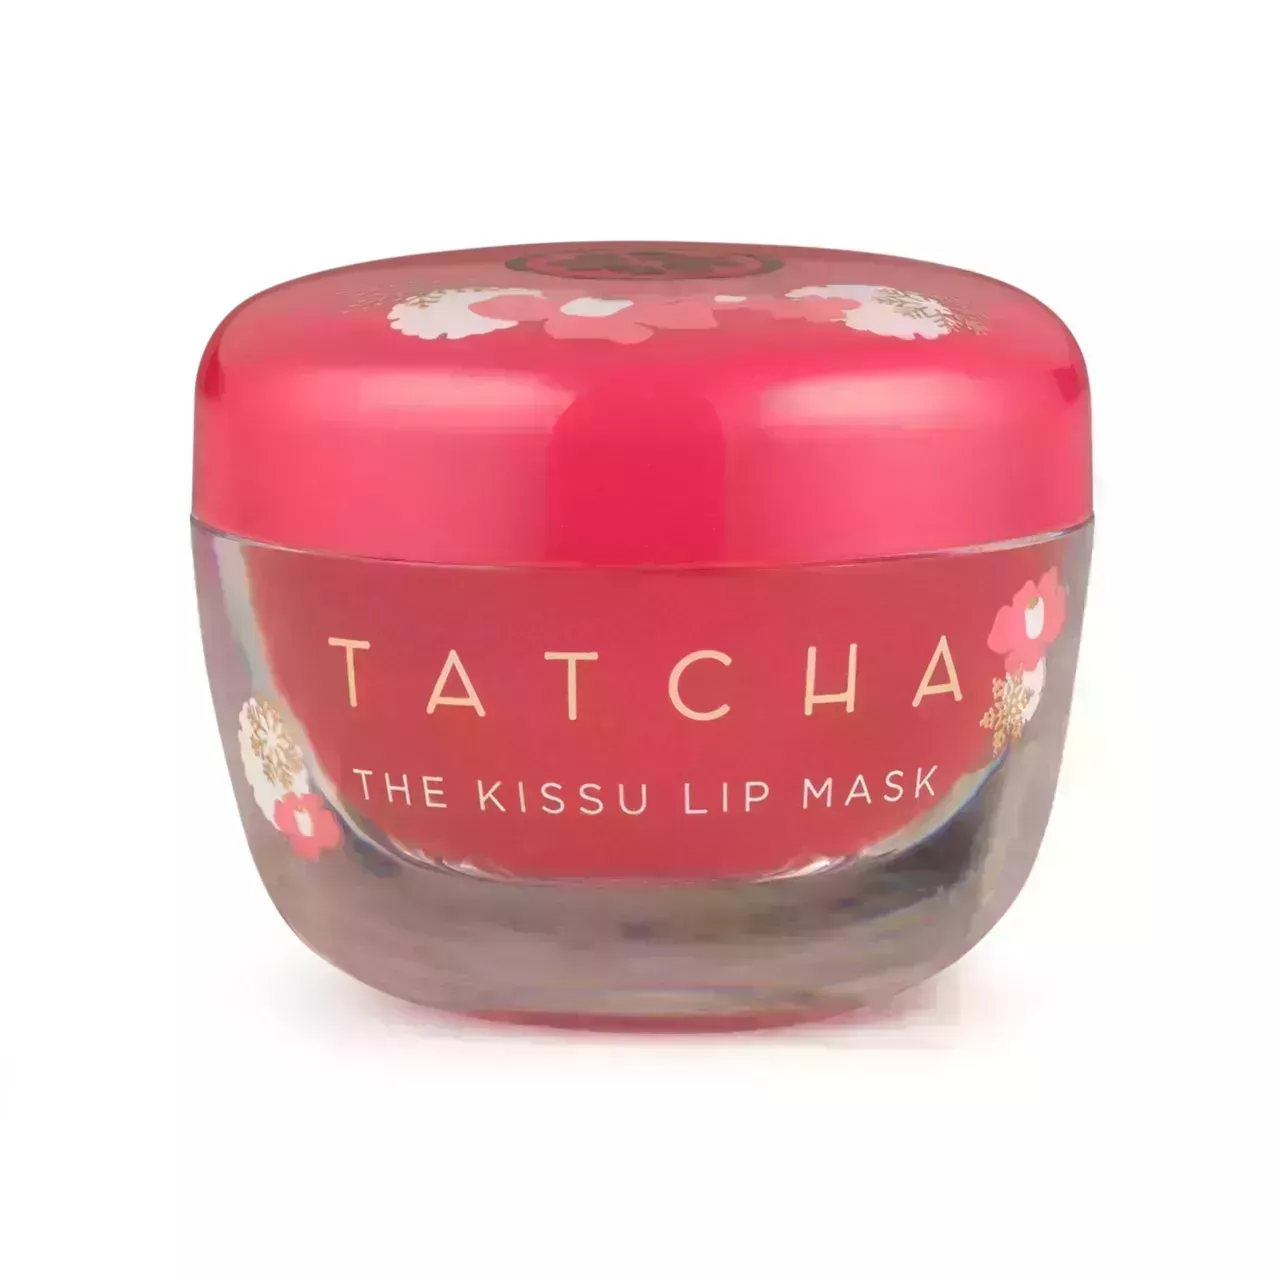 Tatcha The Kissu Lip Mask in Red Camellia on white background